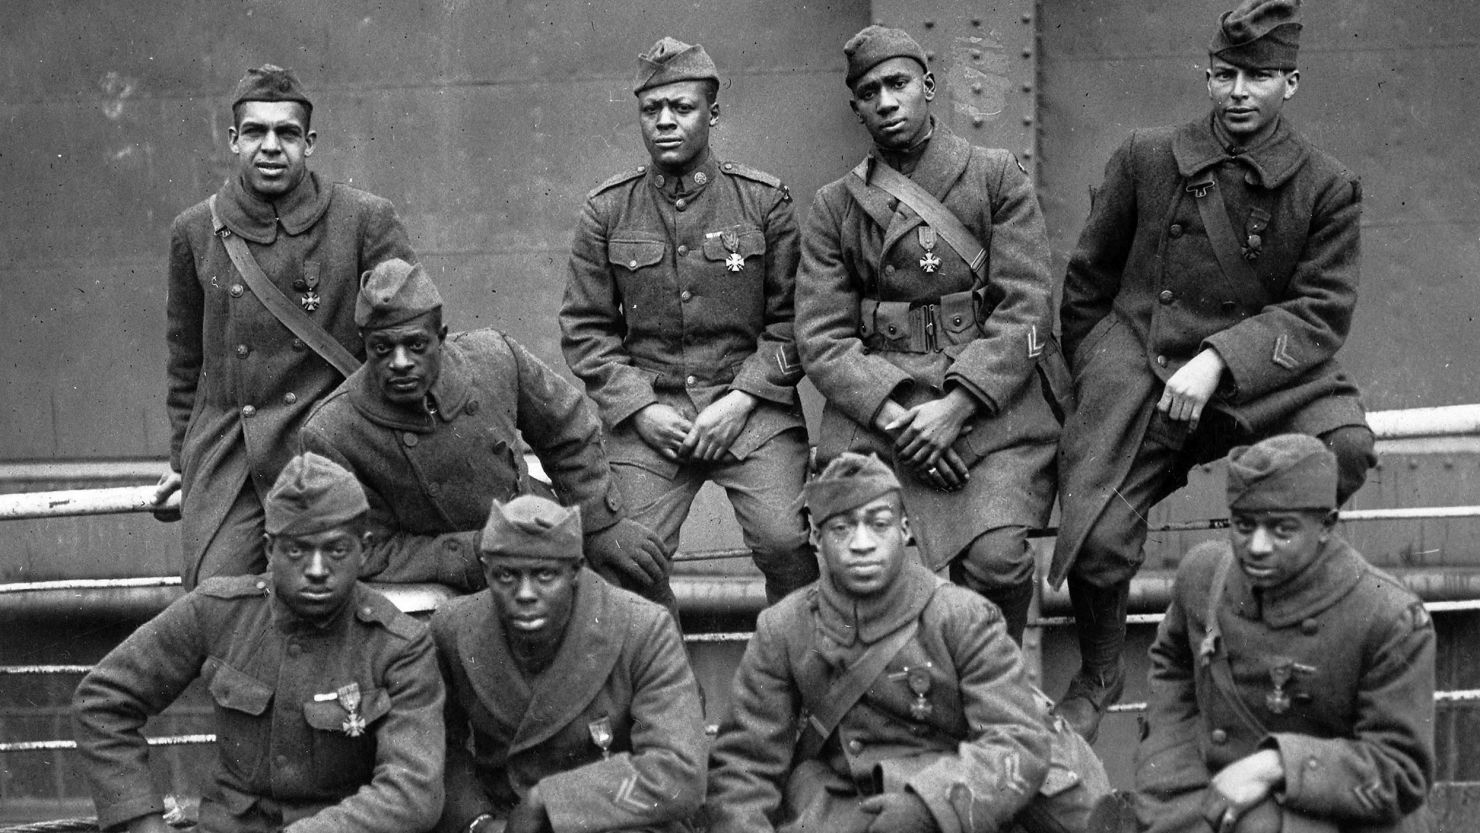 The Harlem Hellfighters, the nickname for members of the segregated 369th Infantry Regiment, will receive a Congressional Gold Medal for their contributions during World War I. 